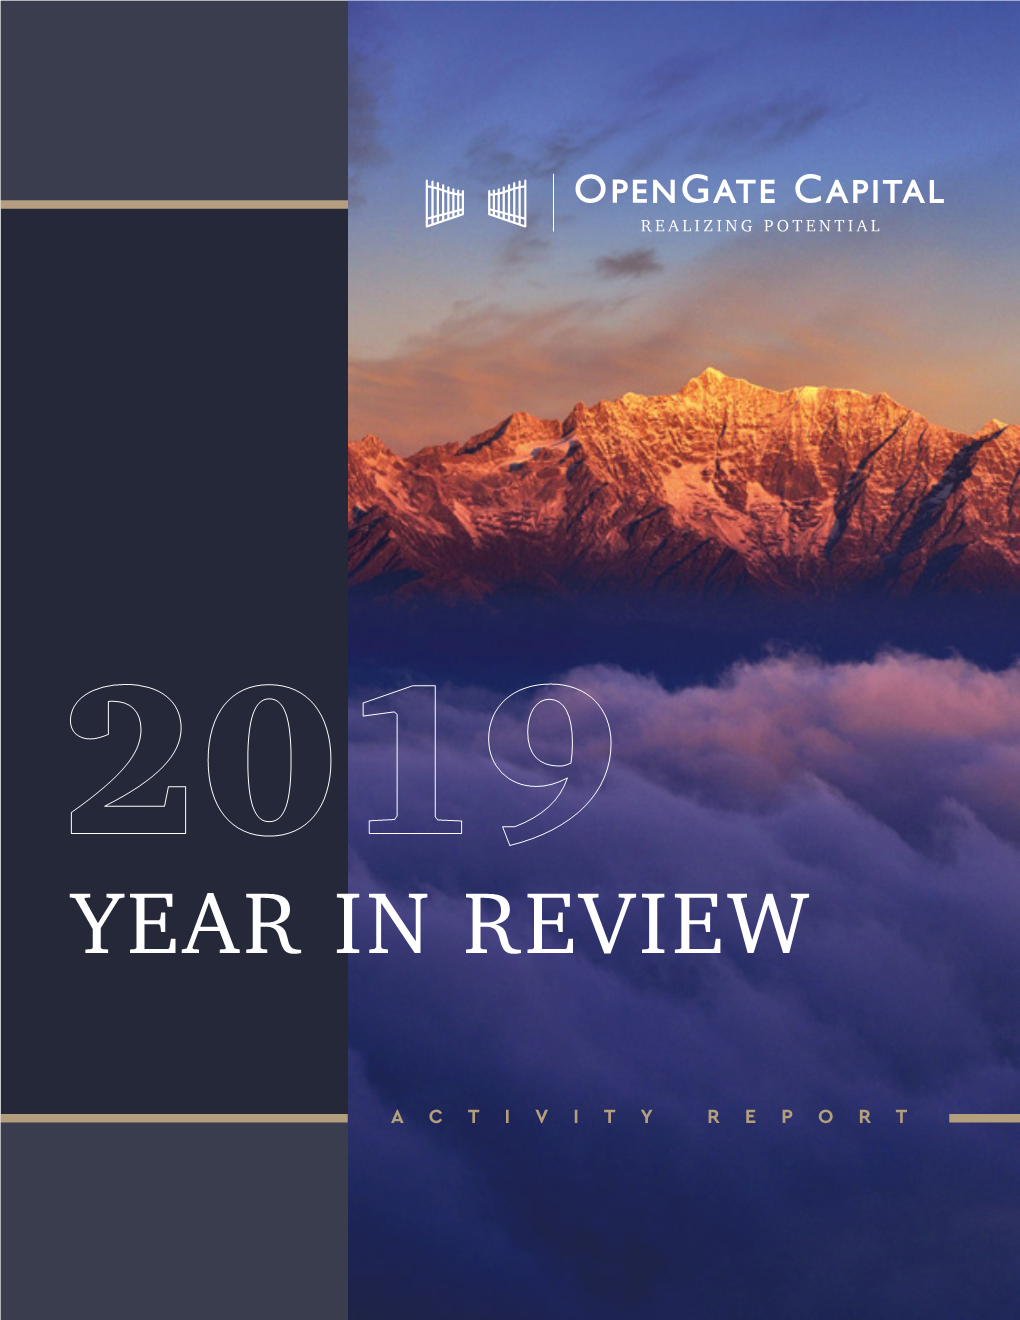 2019 Year in Review Activity Report January 16, 2020